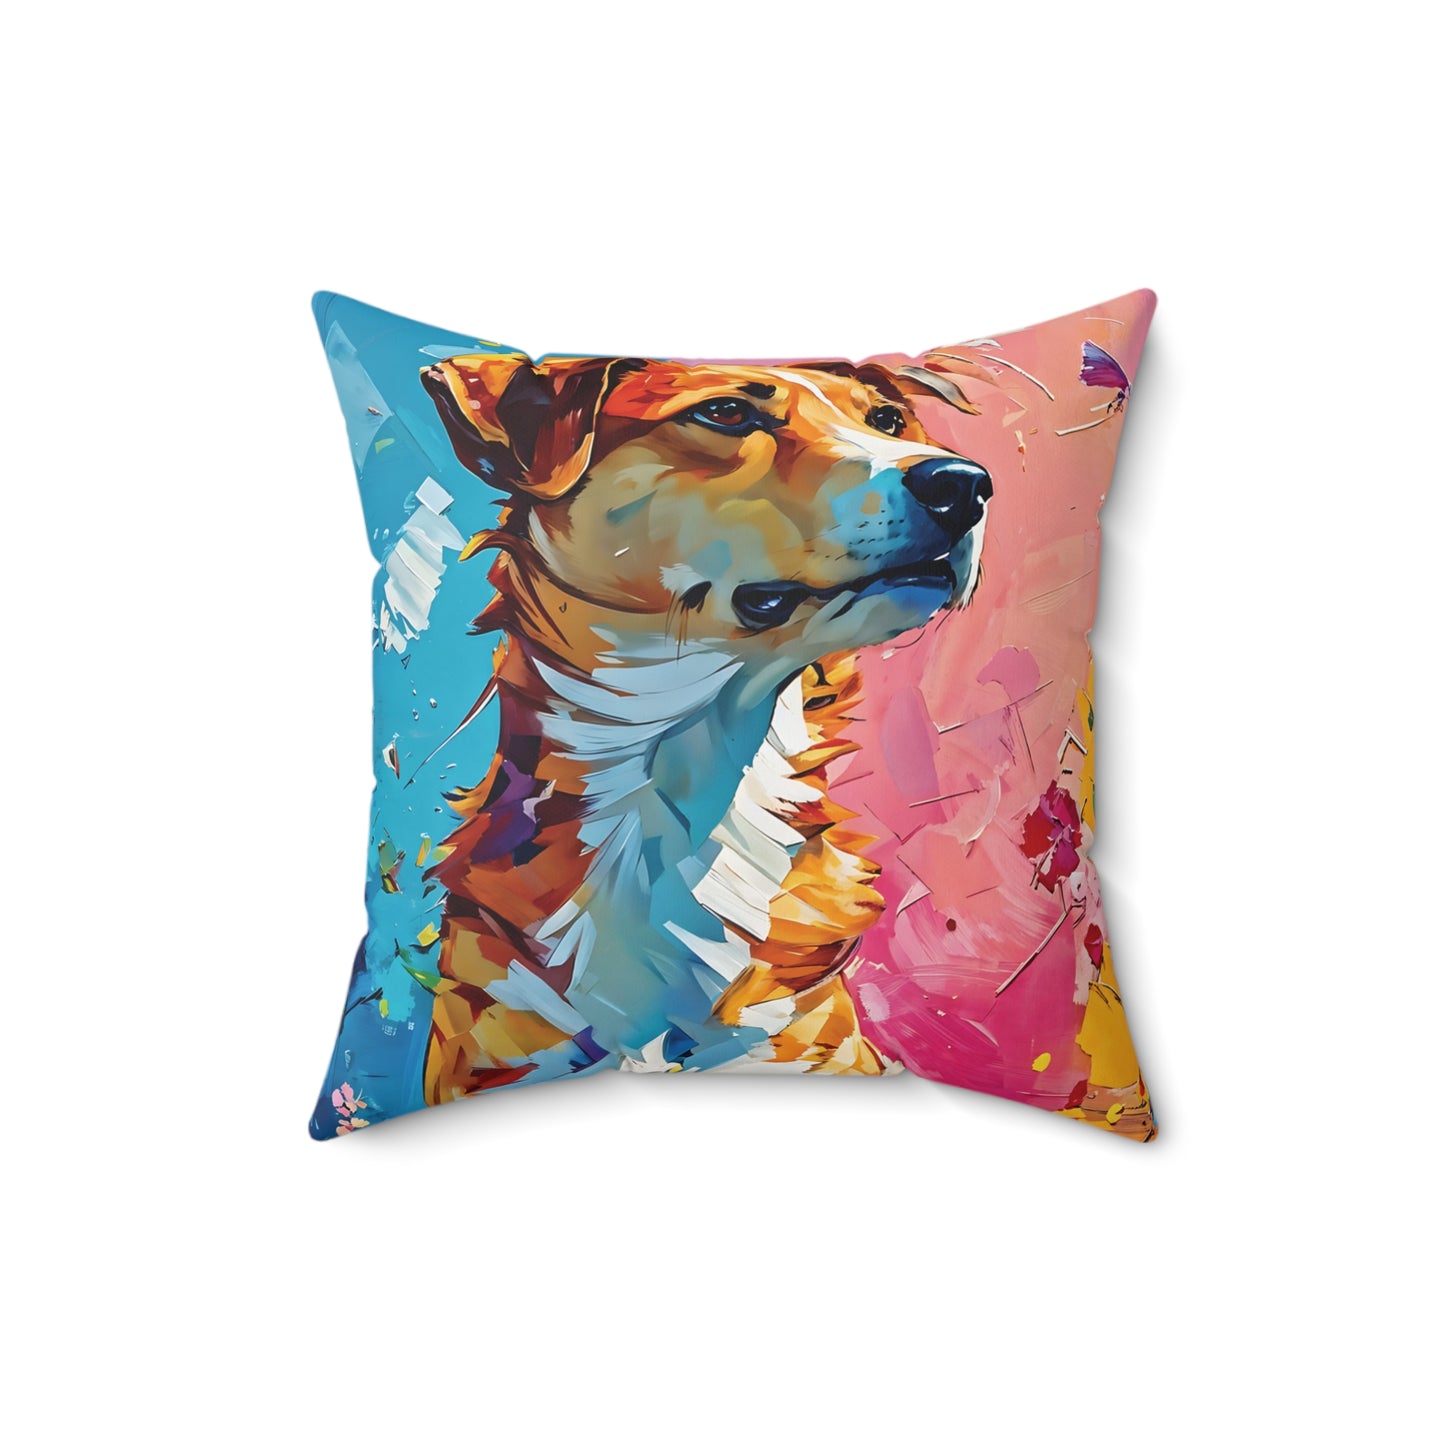 Painted Dog Square Pillow